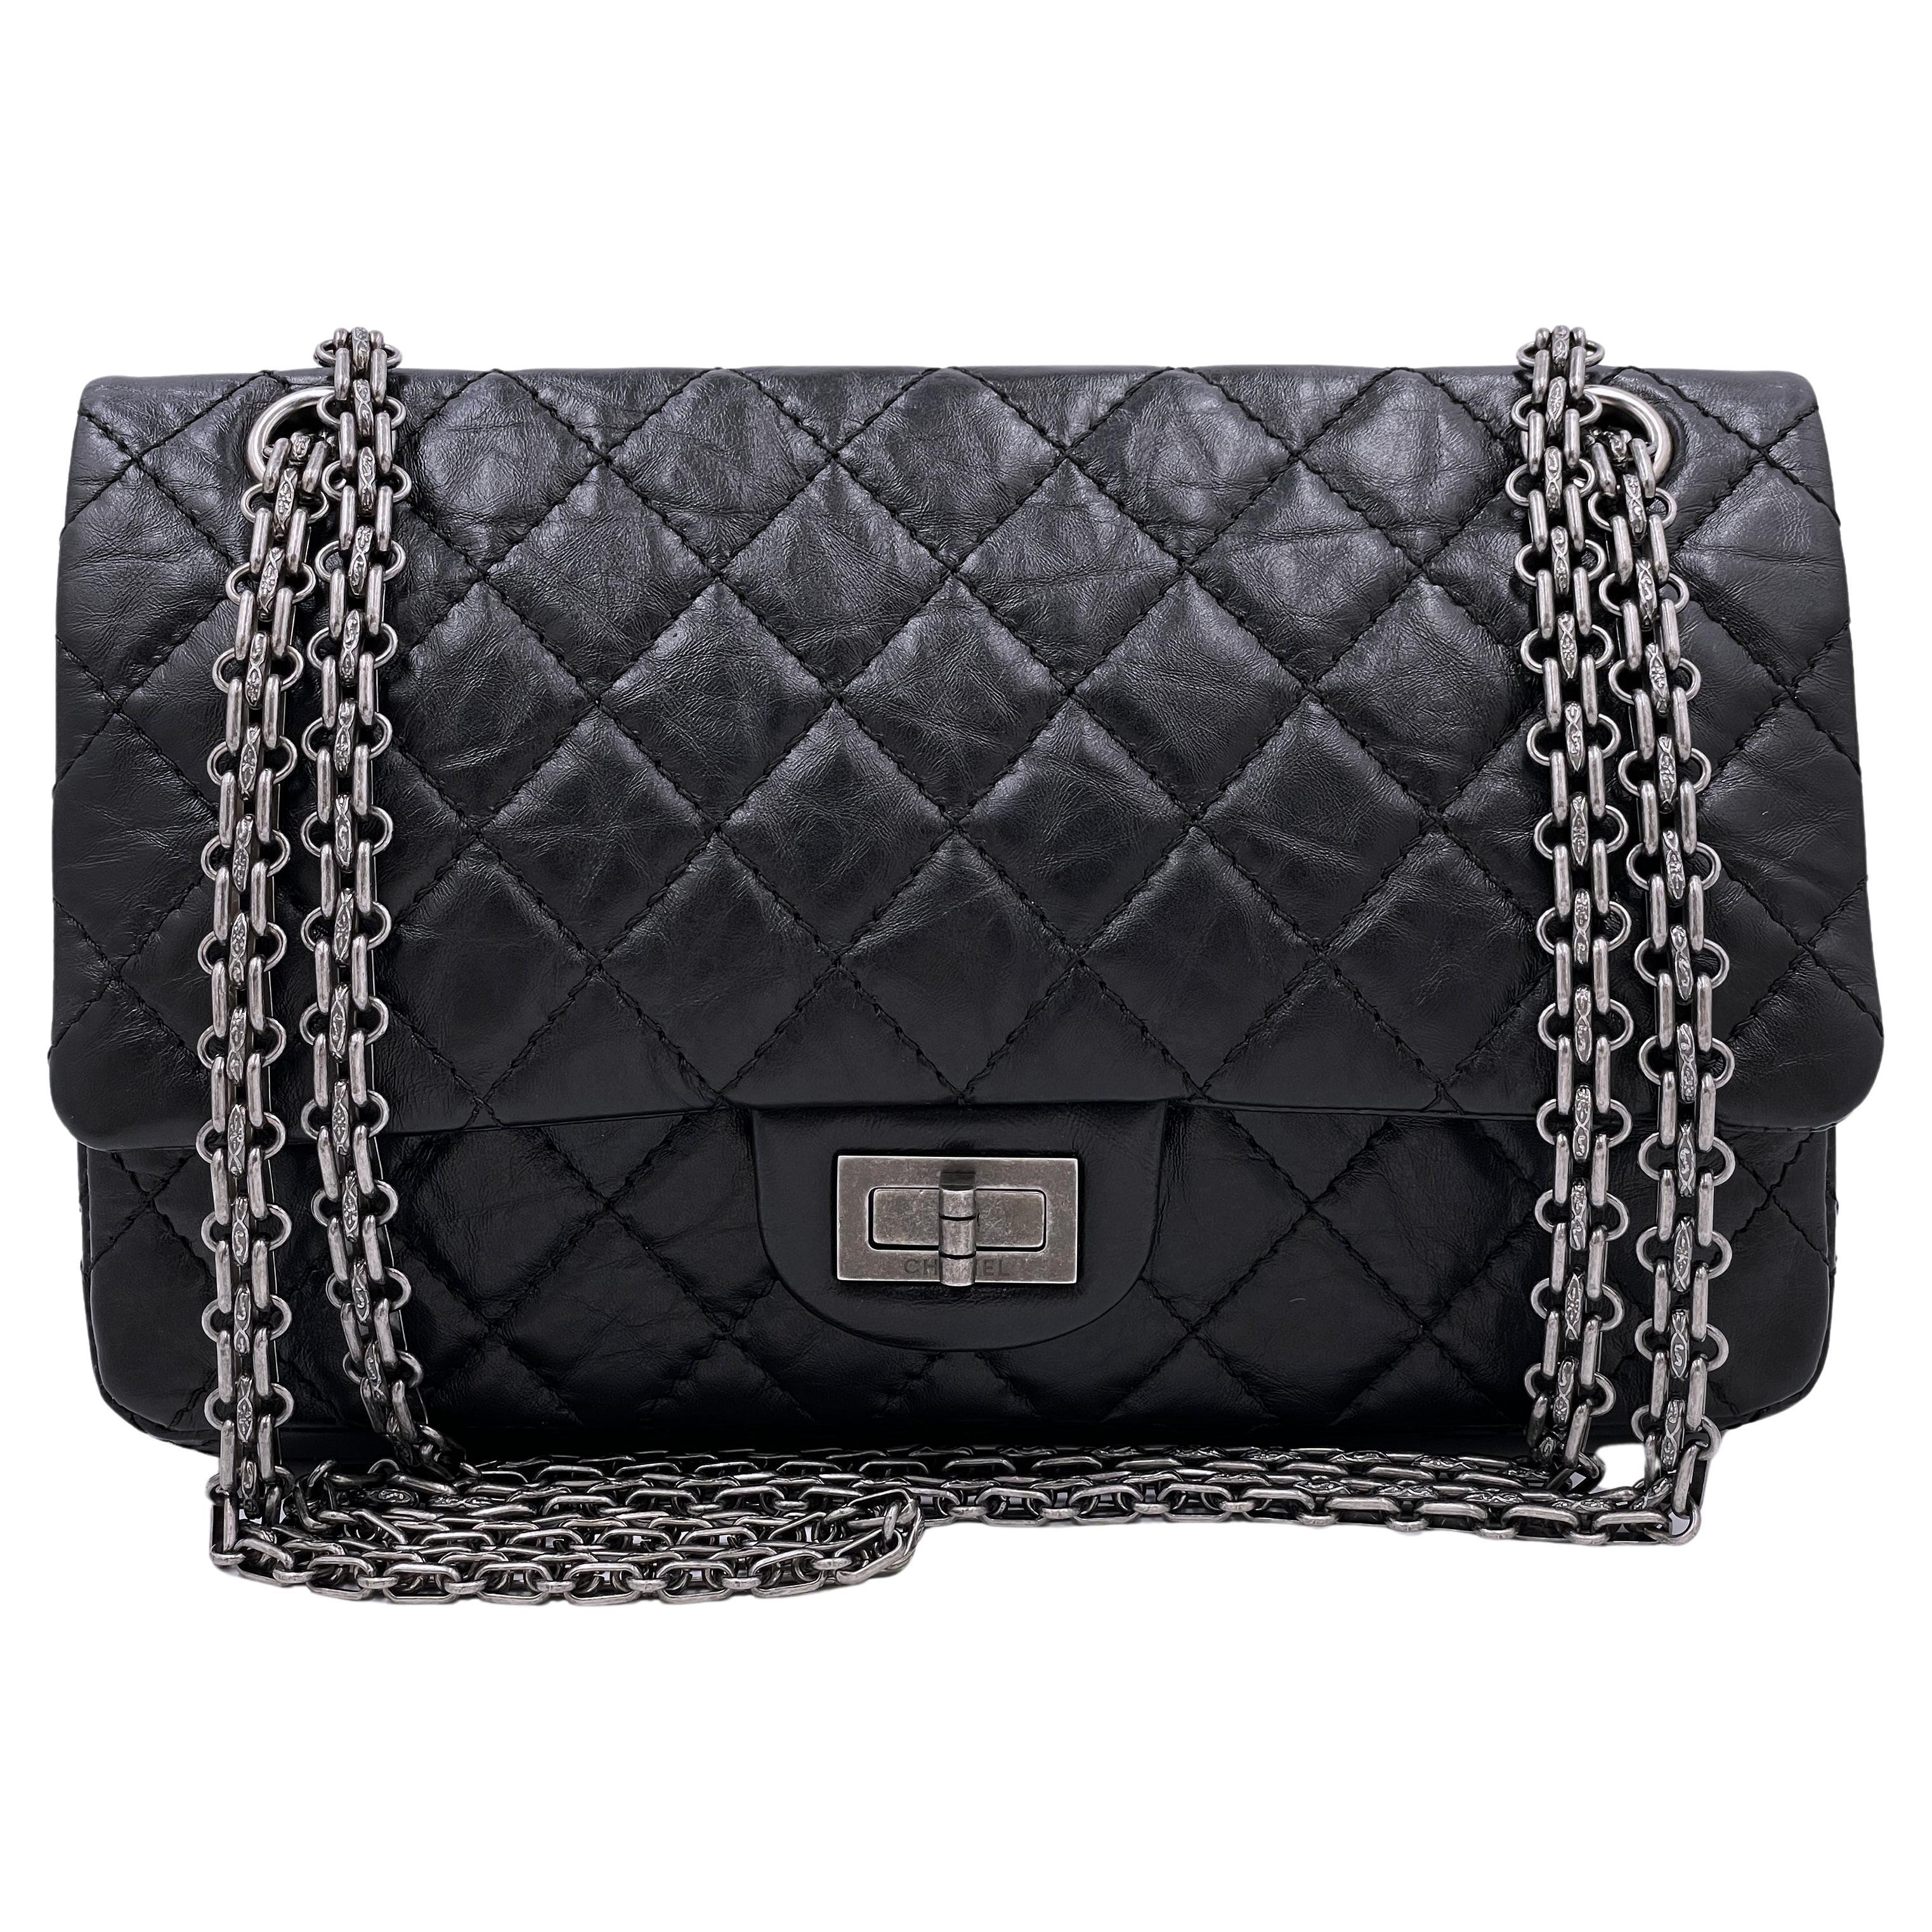 Chanel Black 2.55 Reissue Classic Double Flap Bag RHW 225 66892 For Sale